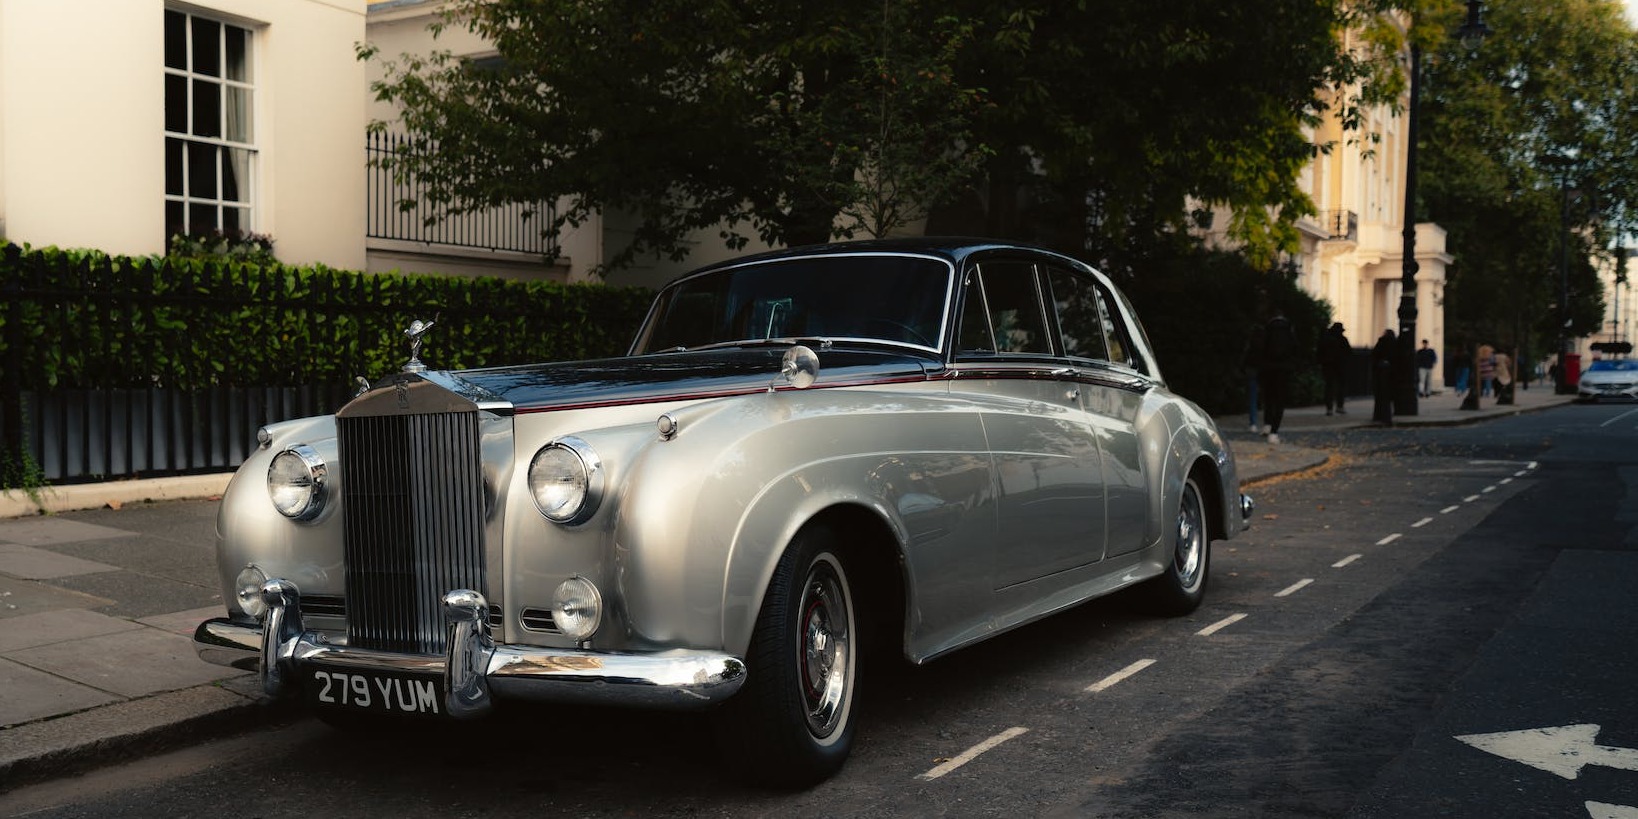 What Are the Most Stylish Prom Car Hire Options in Greater London?